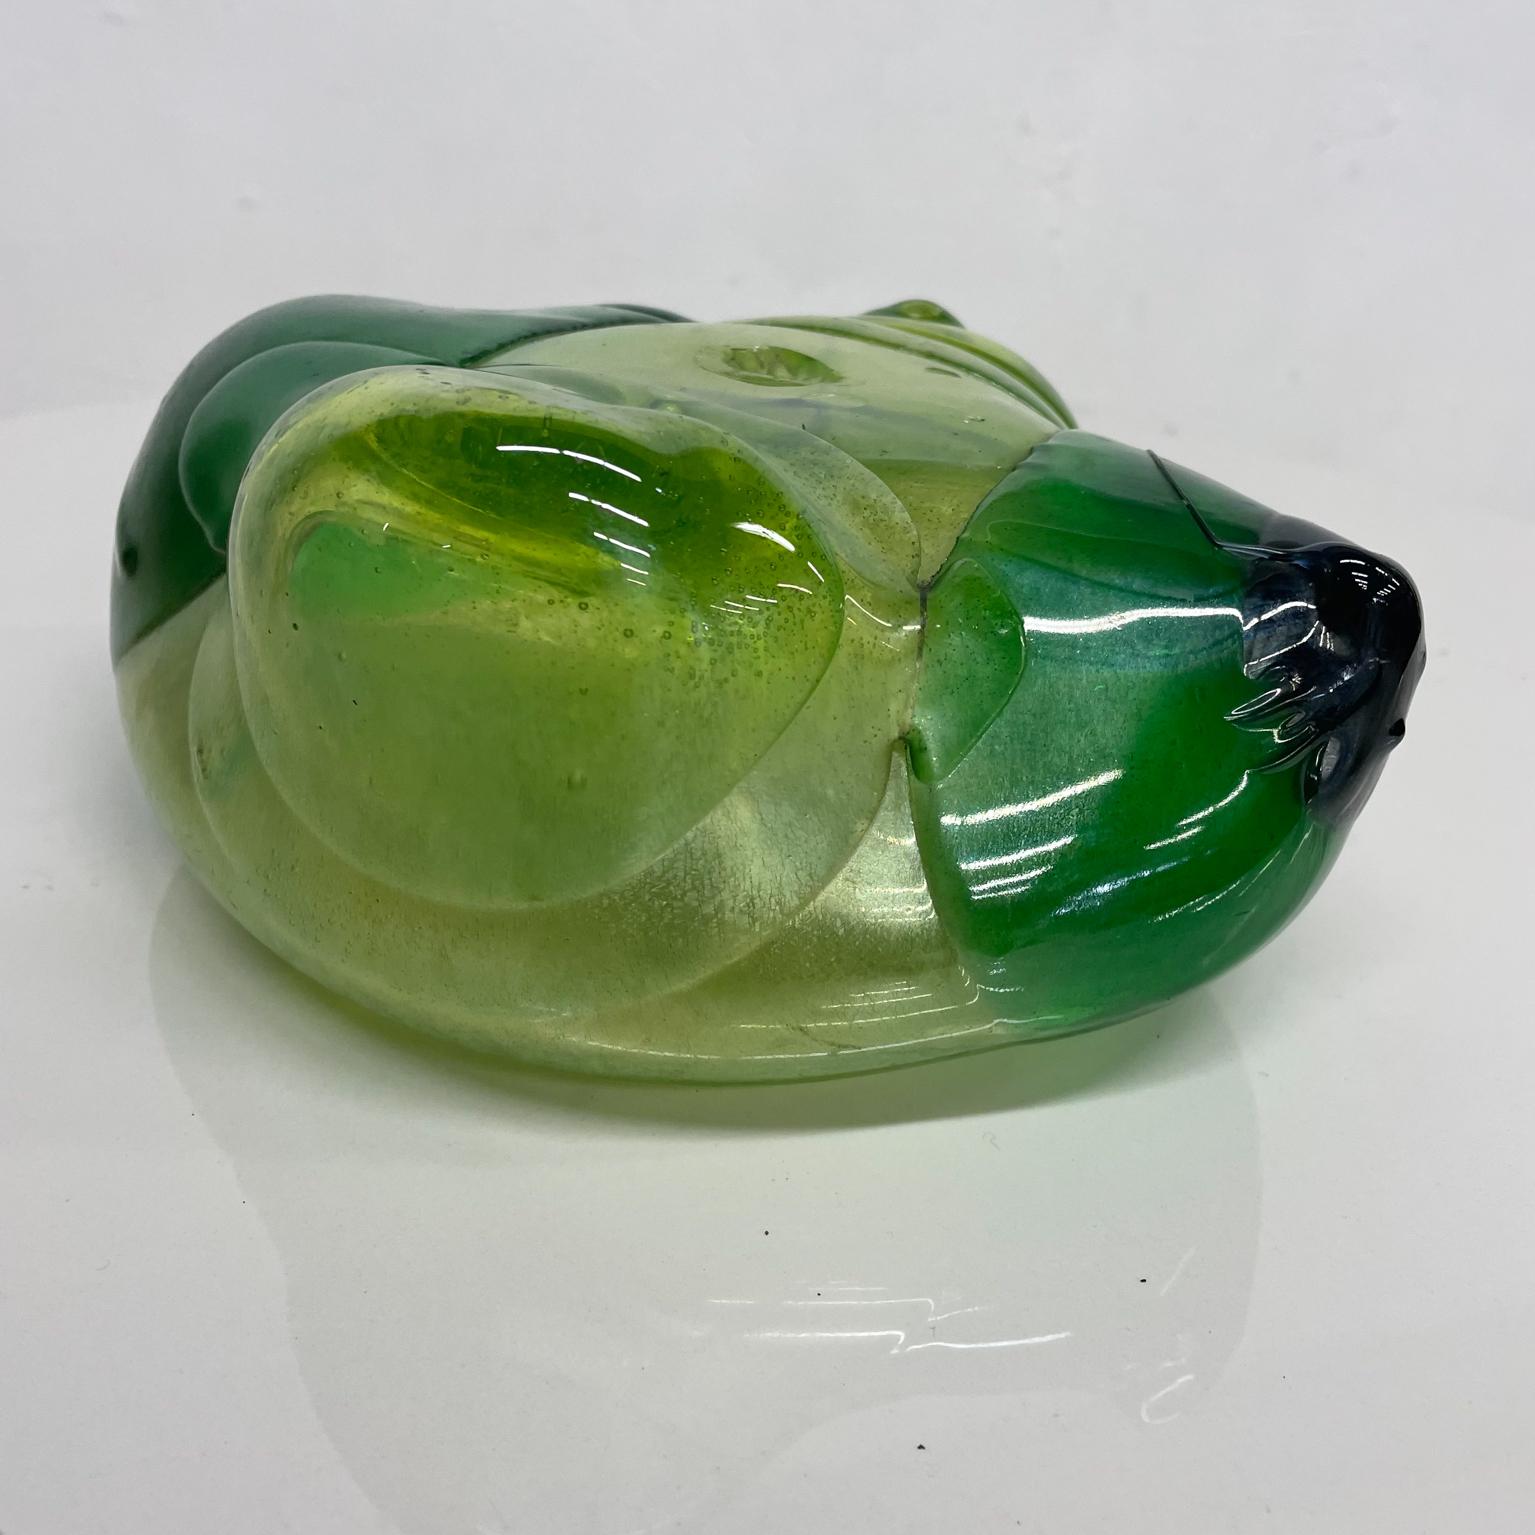 Glass sculpture
1970s abstract green glass sculpture modern free form expression 
Measures: 7.38 W x 8.5 D x 3.75 H
Preowned original unrestored vintage condition.
Refer to images provided.